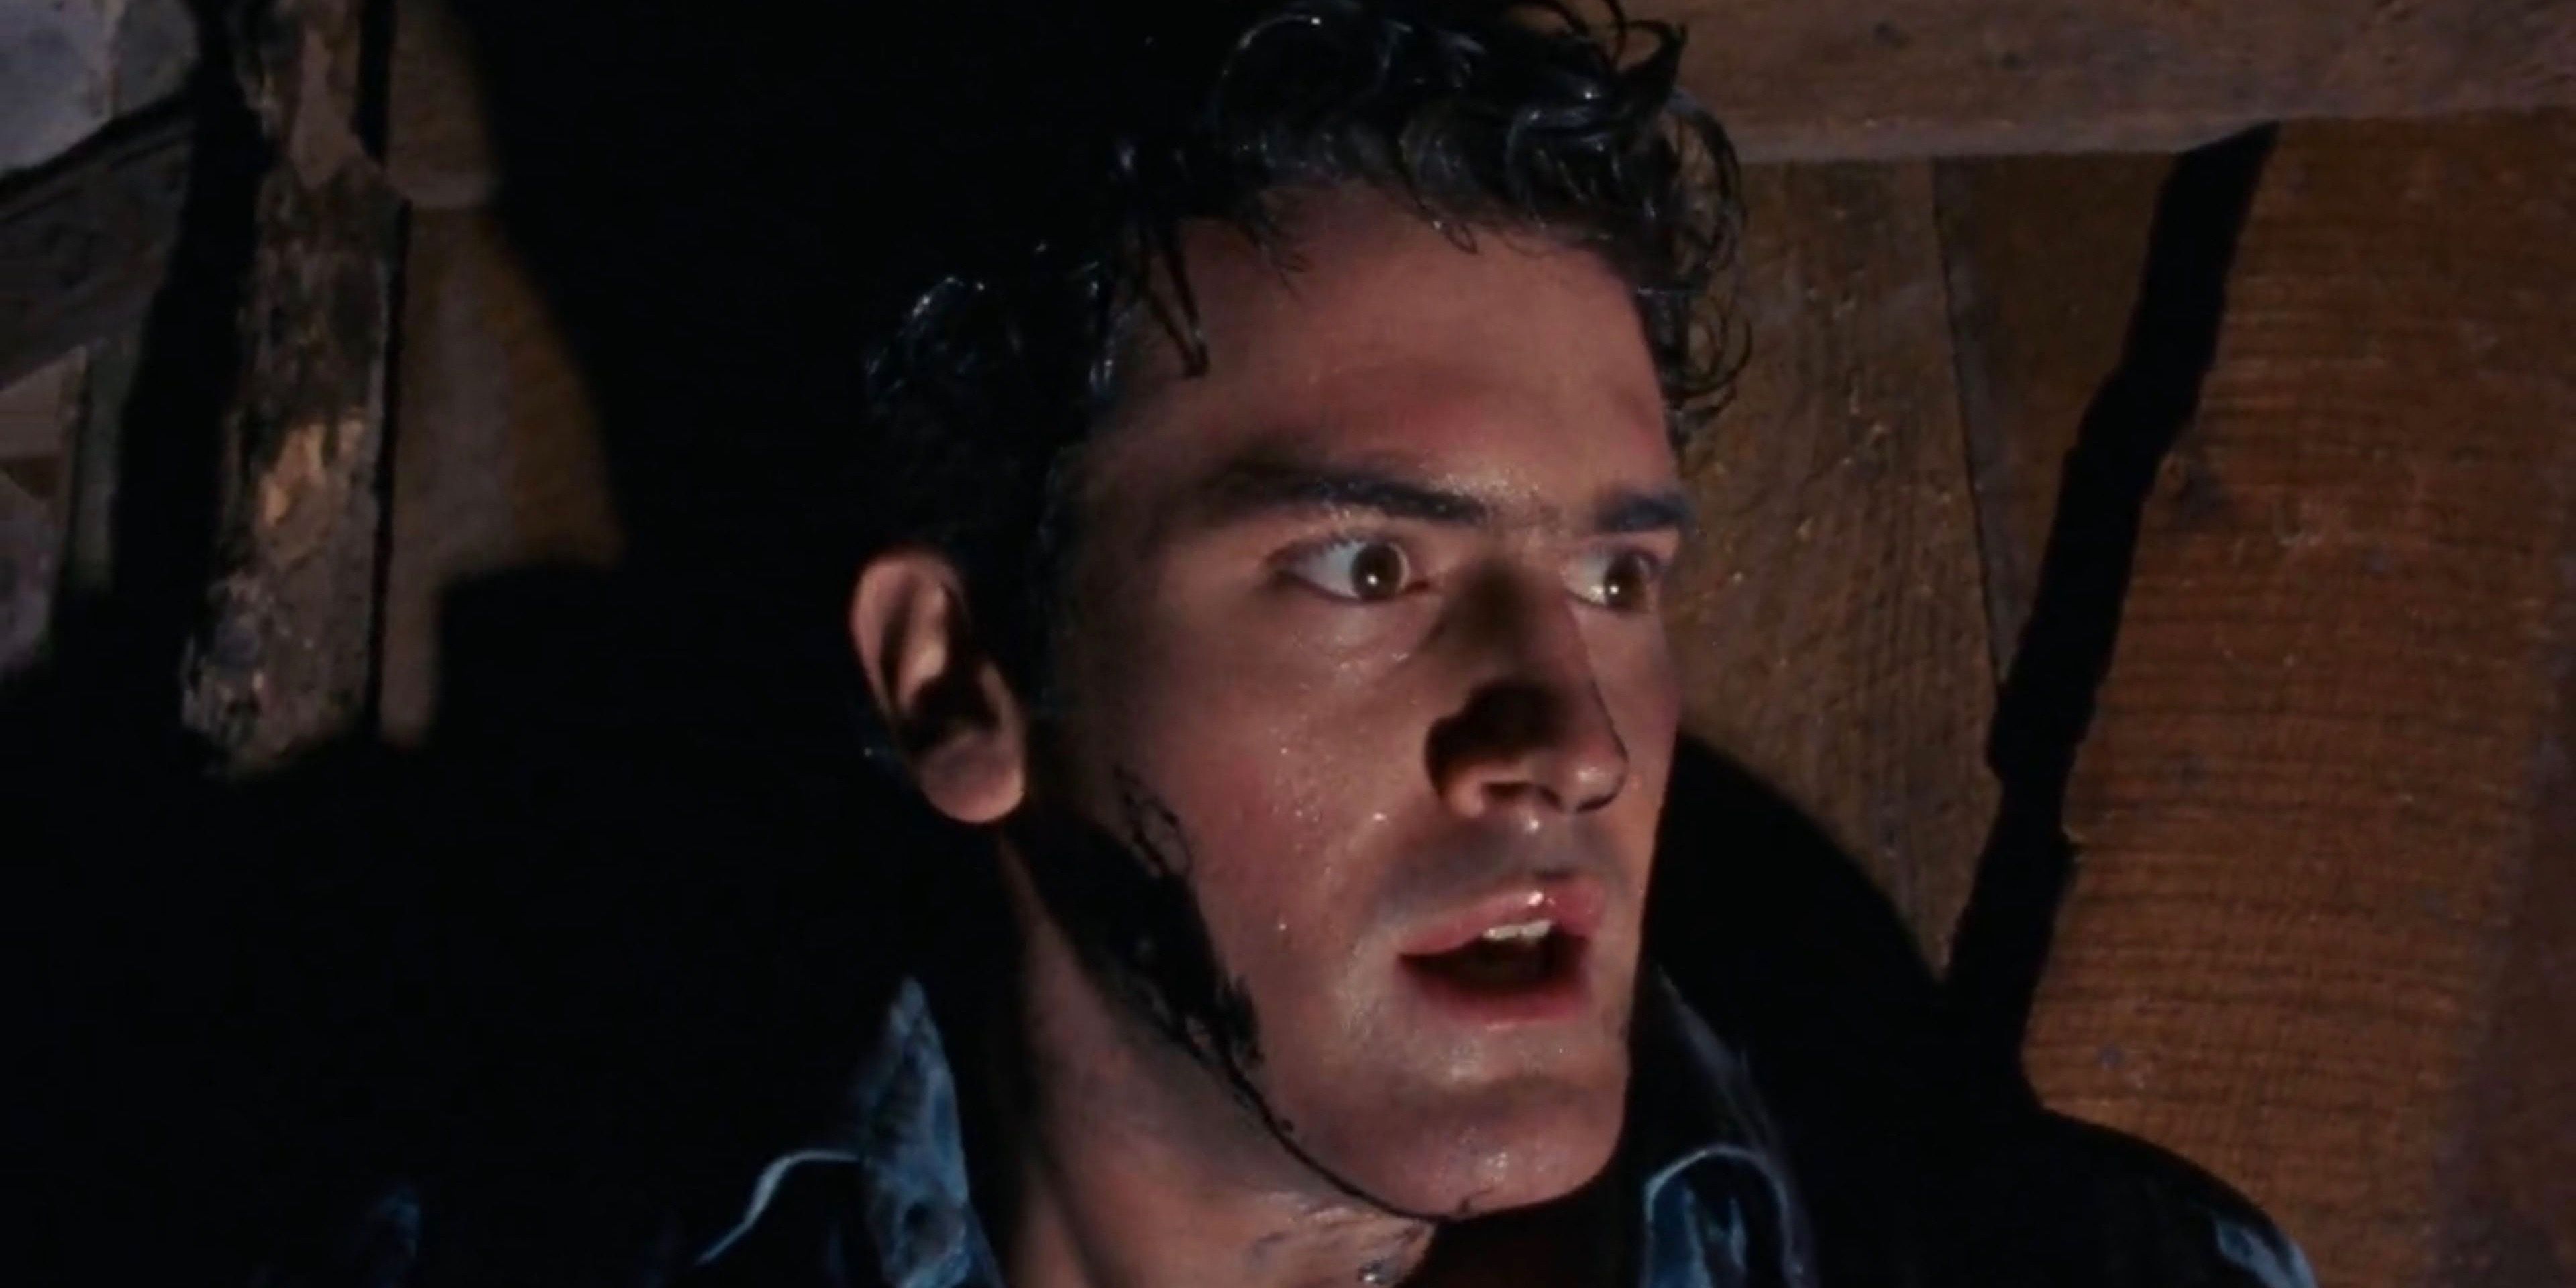 Bruce Cambell as Ash Williams looking concerned in Evil Dead